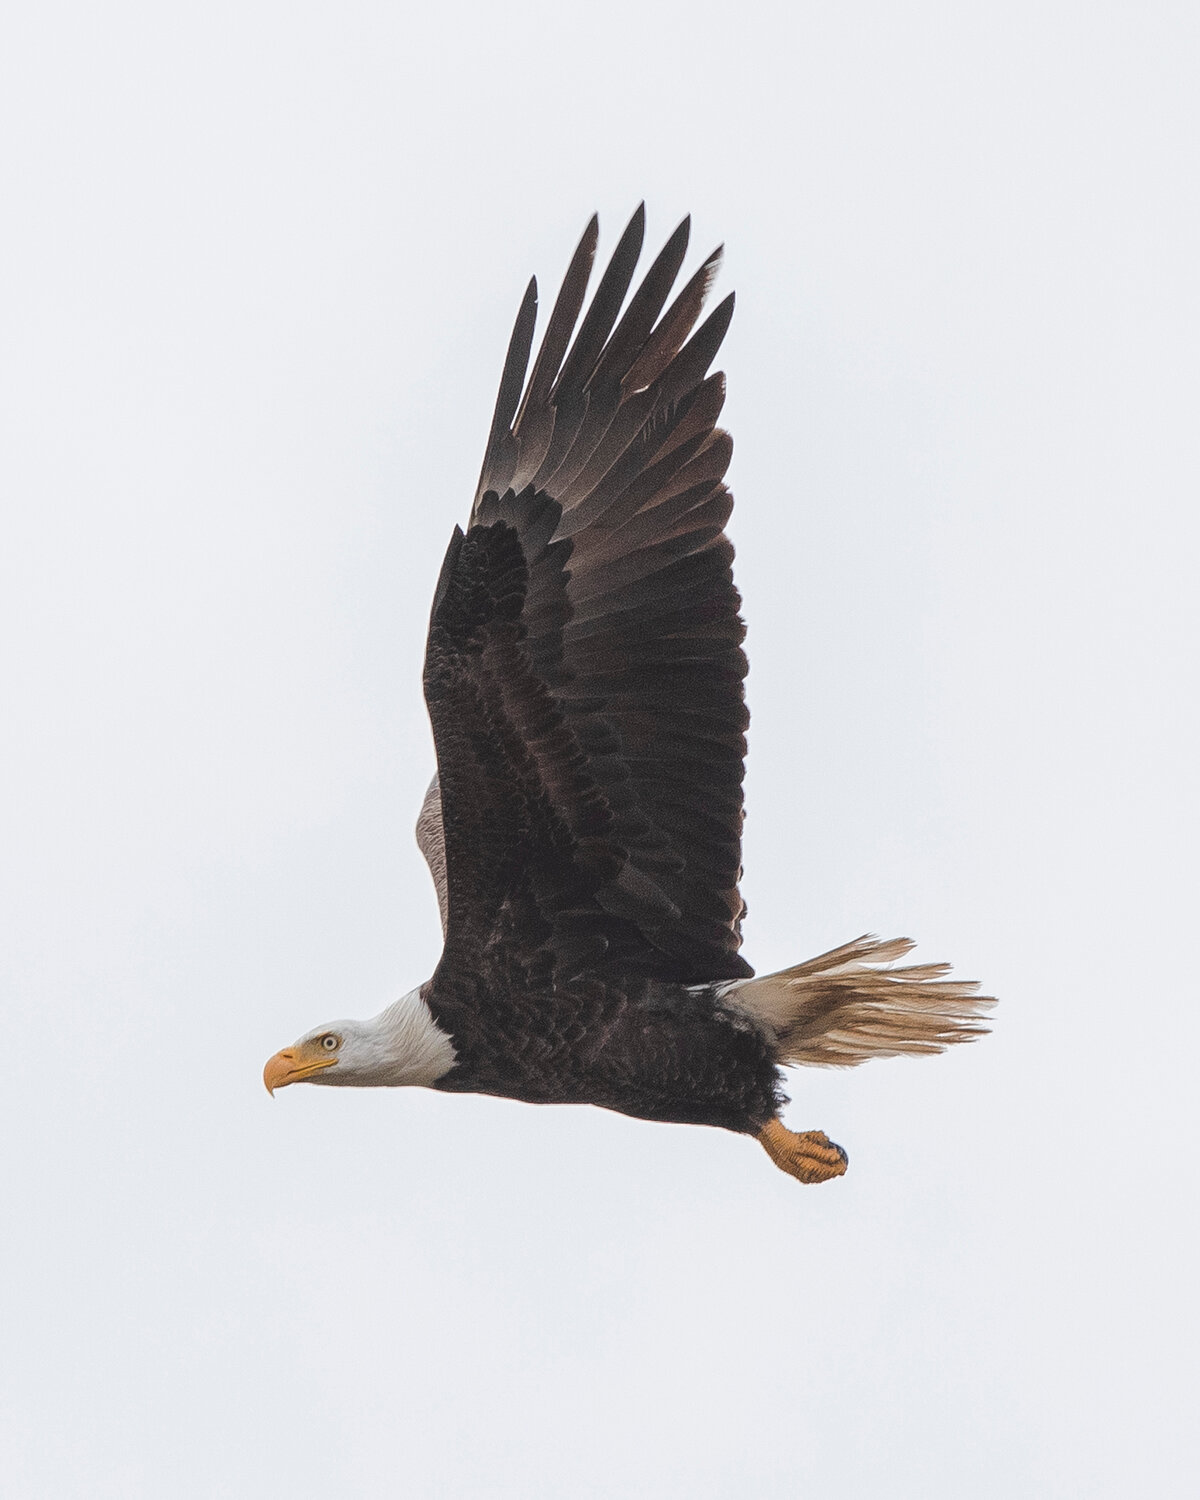 MICAH GREEN / GULF COAST MEDIA

A bald eagle is seen over the Tensaw River.